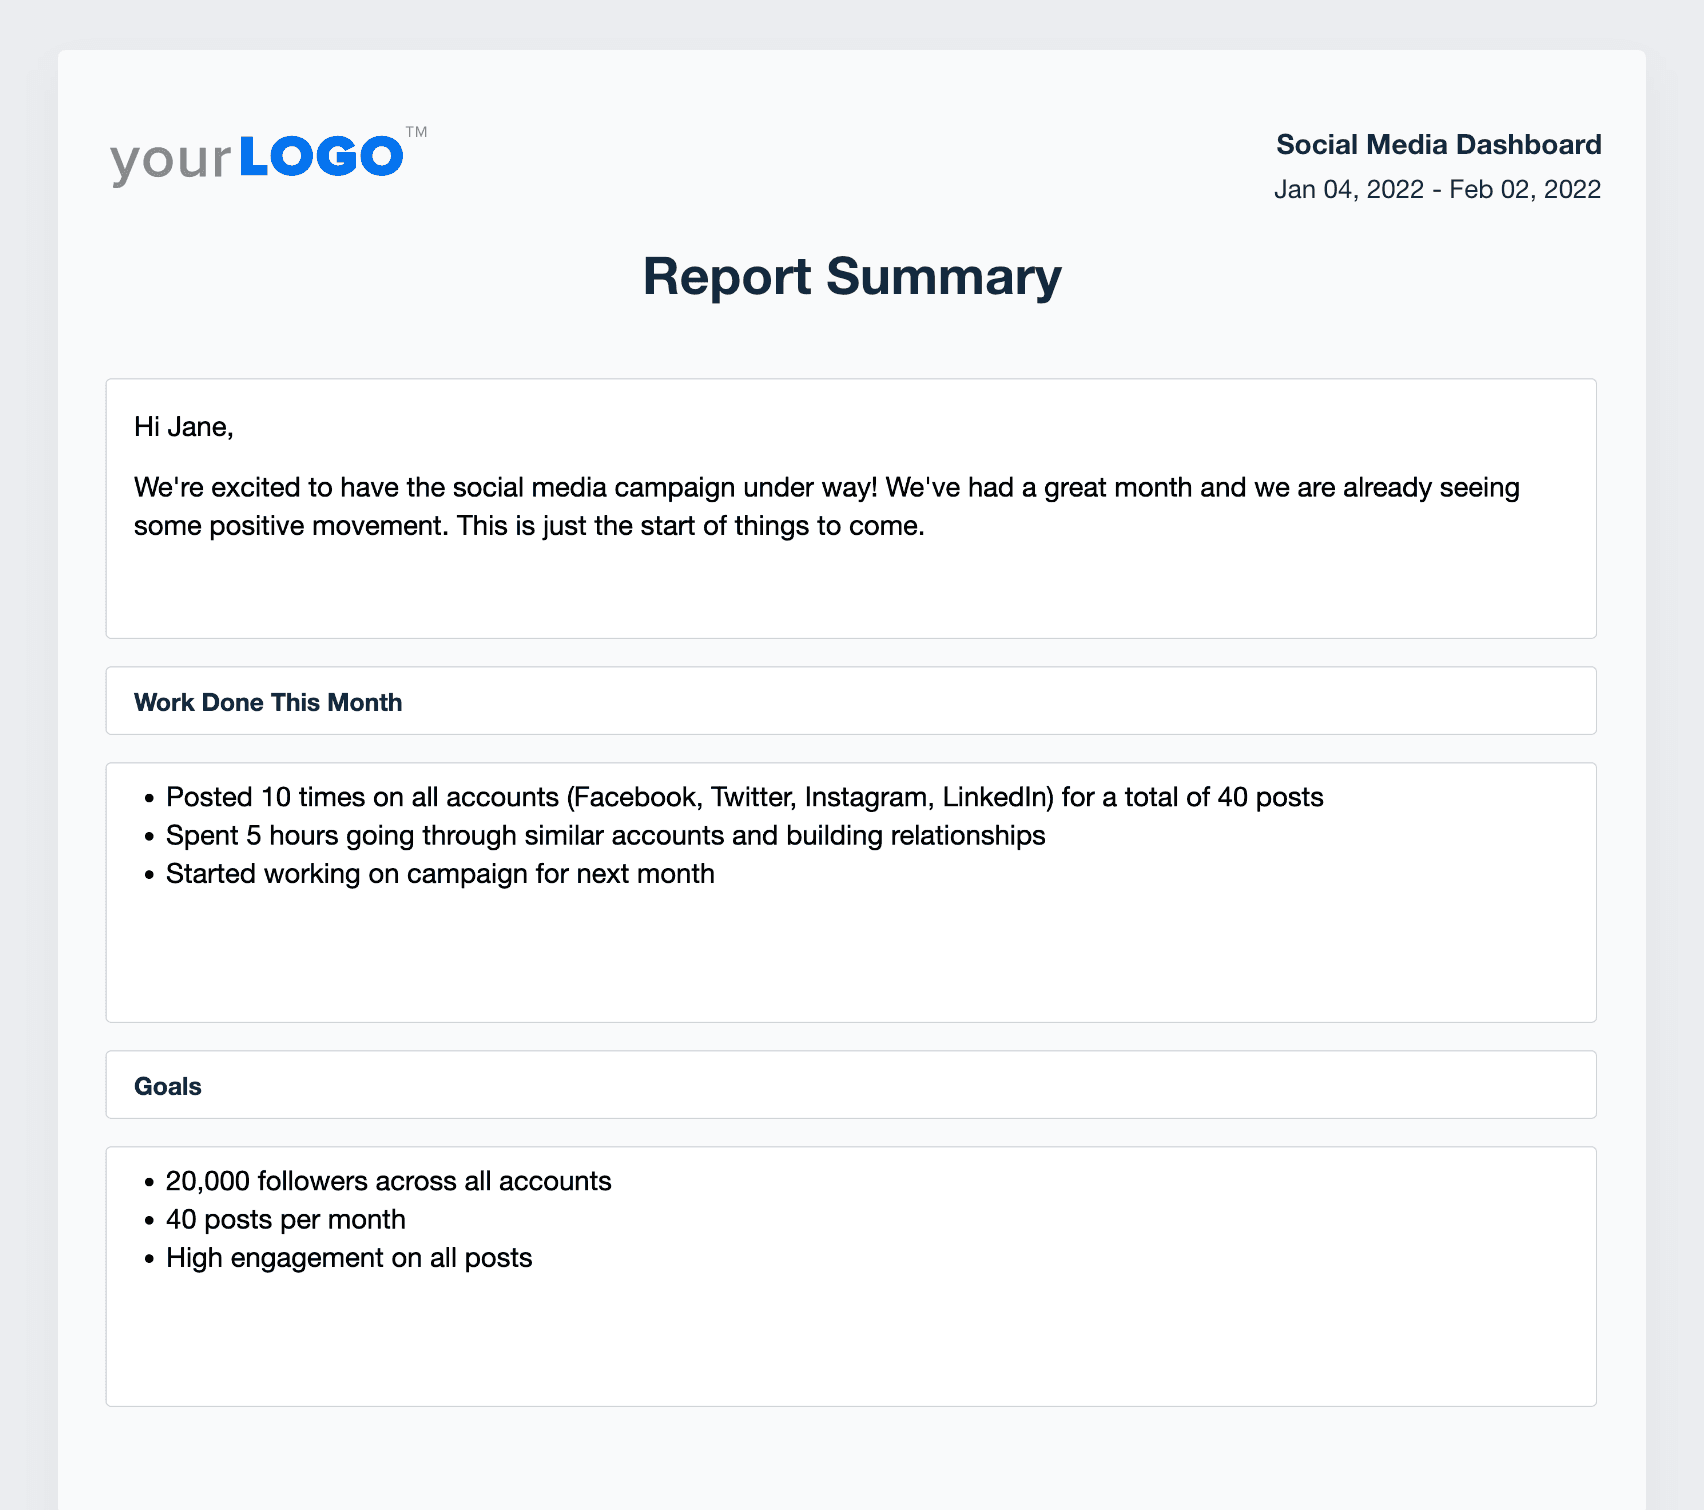 Example of using the report summary to recap social media performance in a monthly report